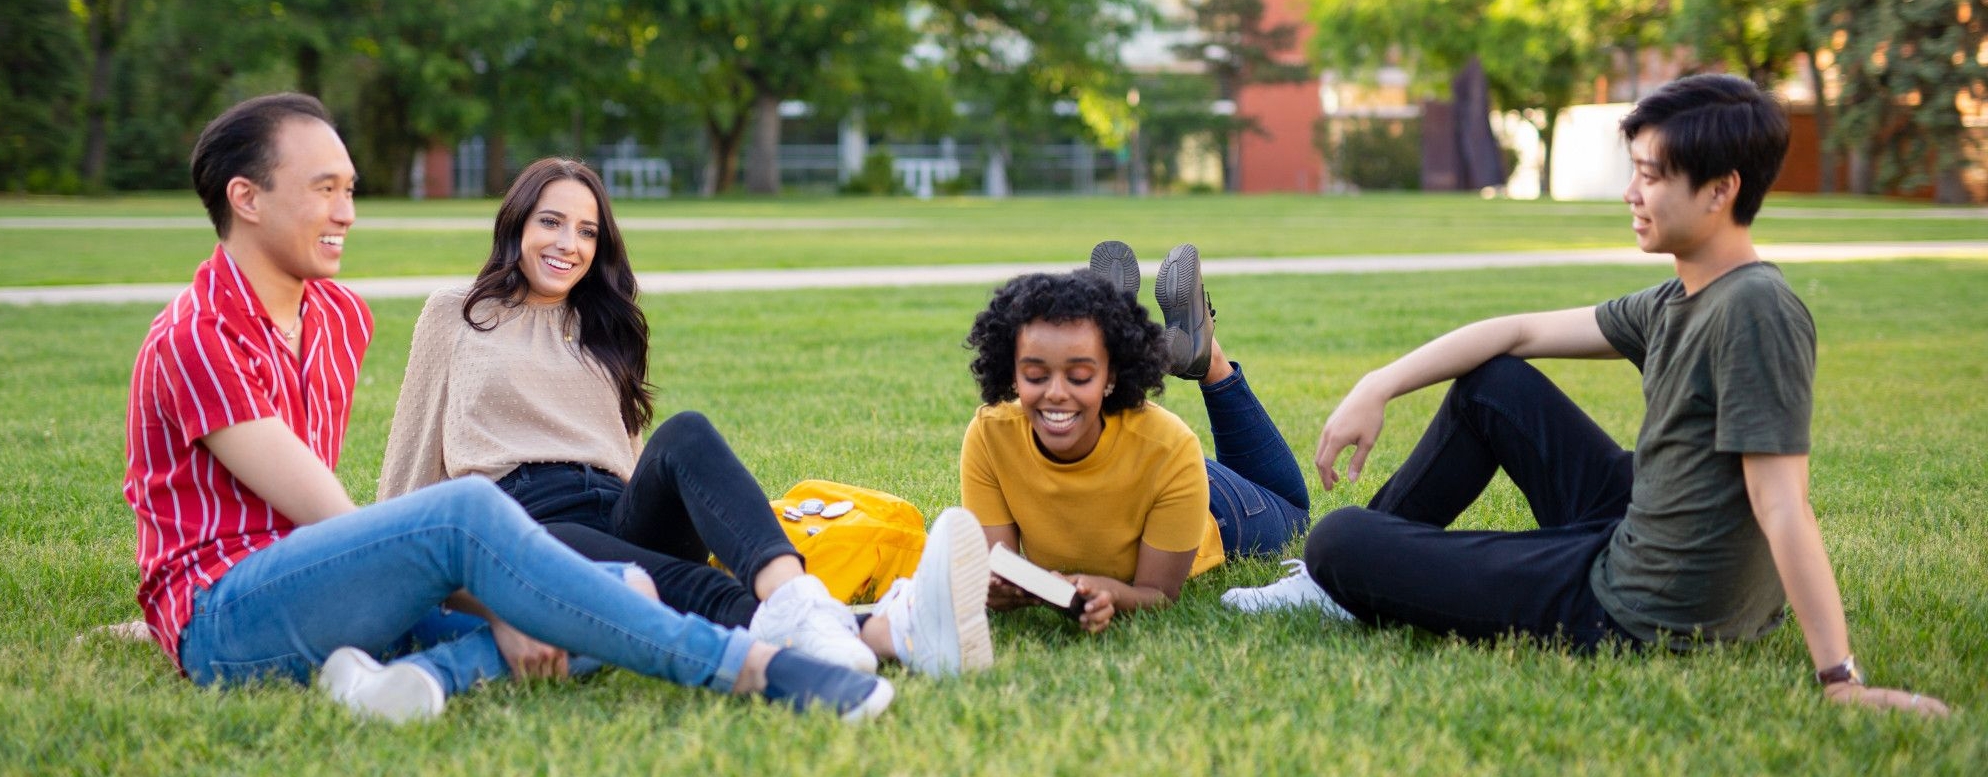 Students hanging out in quad